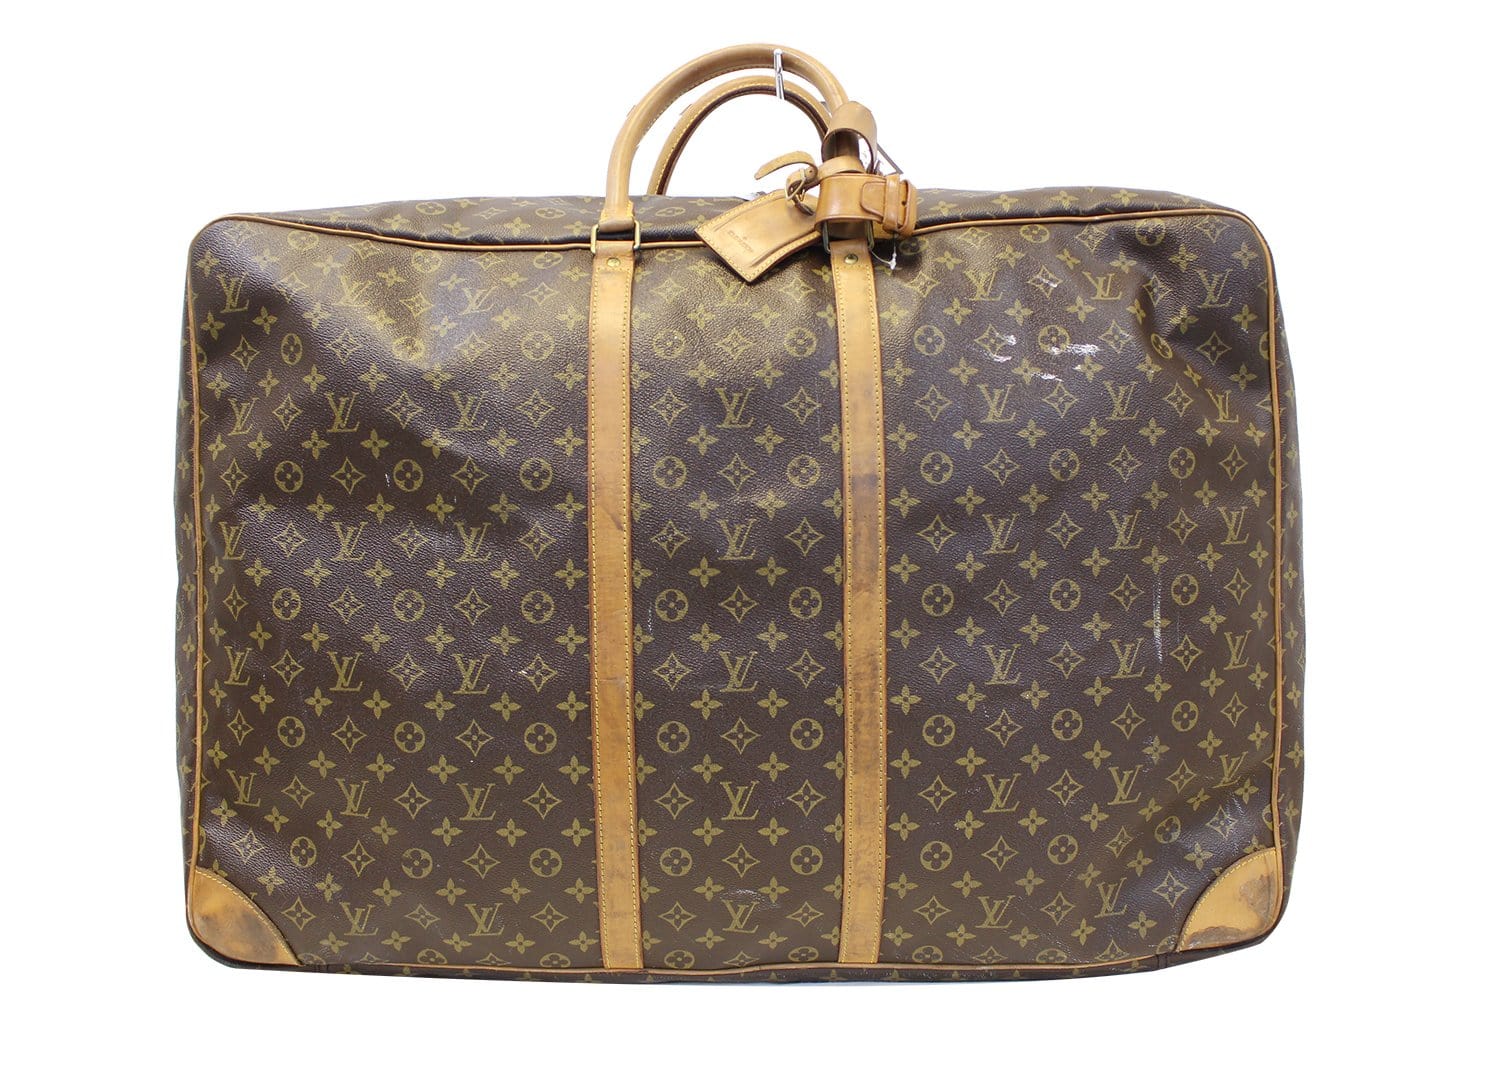 Louis Vuitton The French Co. Softsided Weekender Keepall Bag with